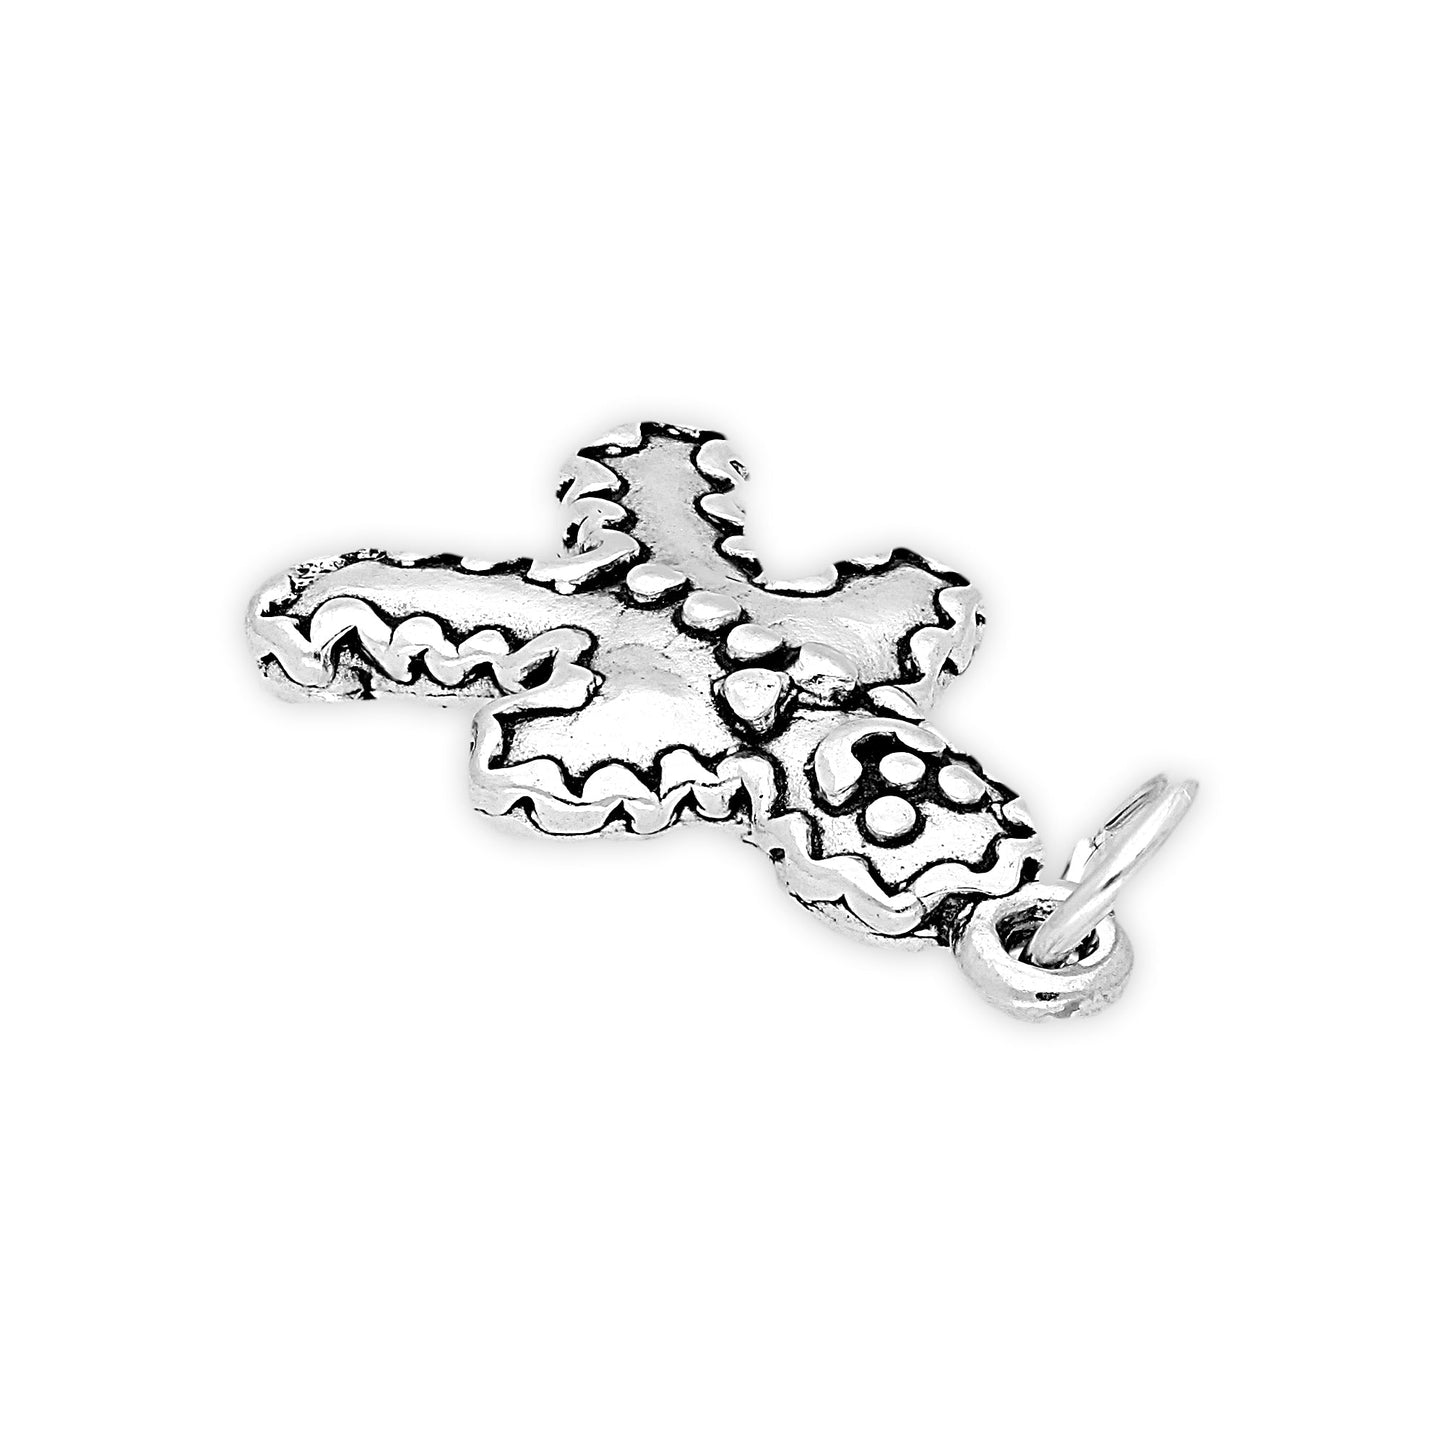 Sterling Silver Gingerbread Man Charm